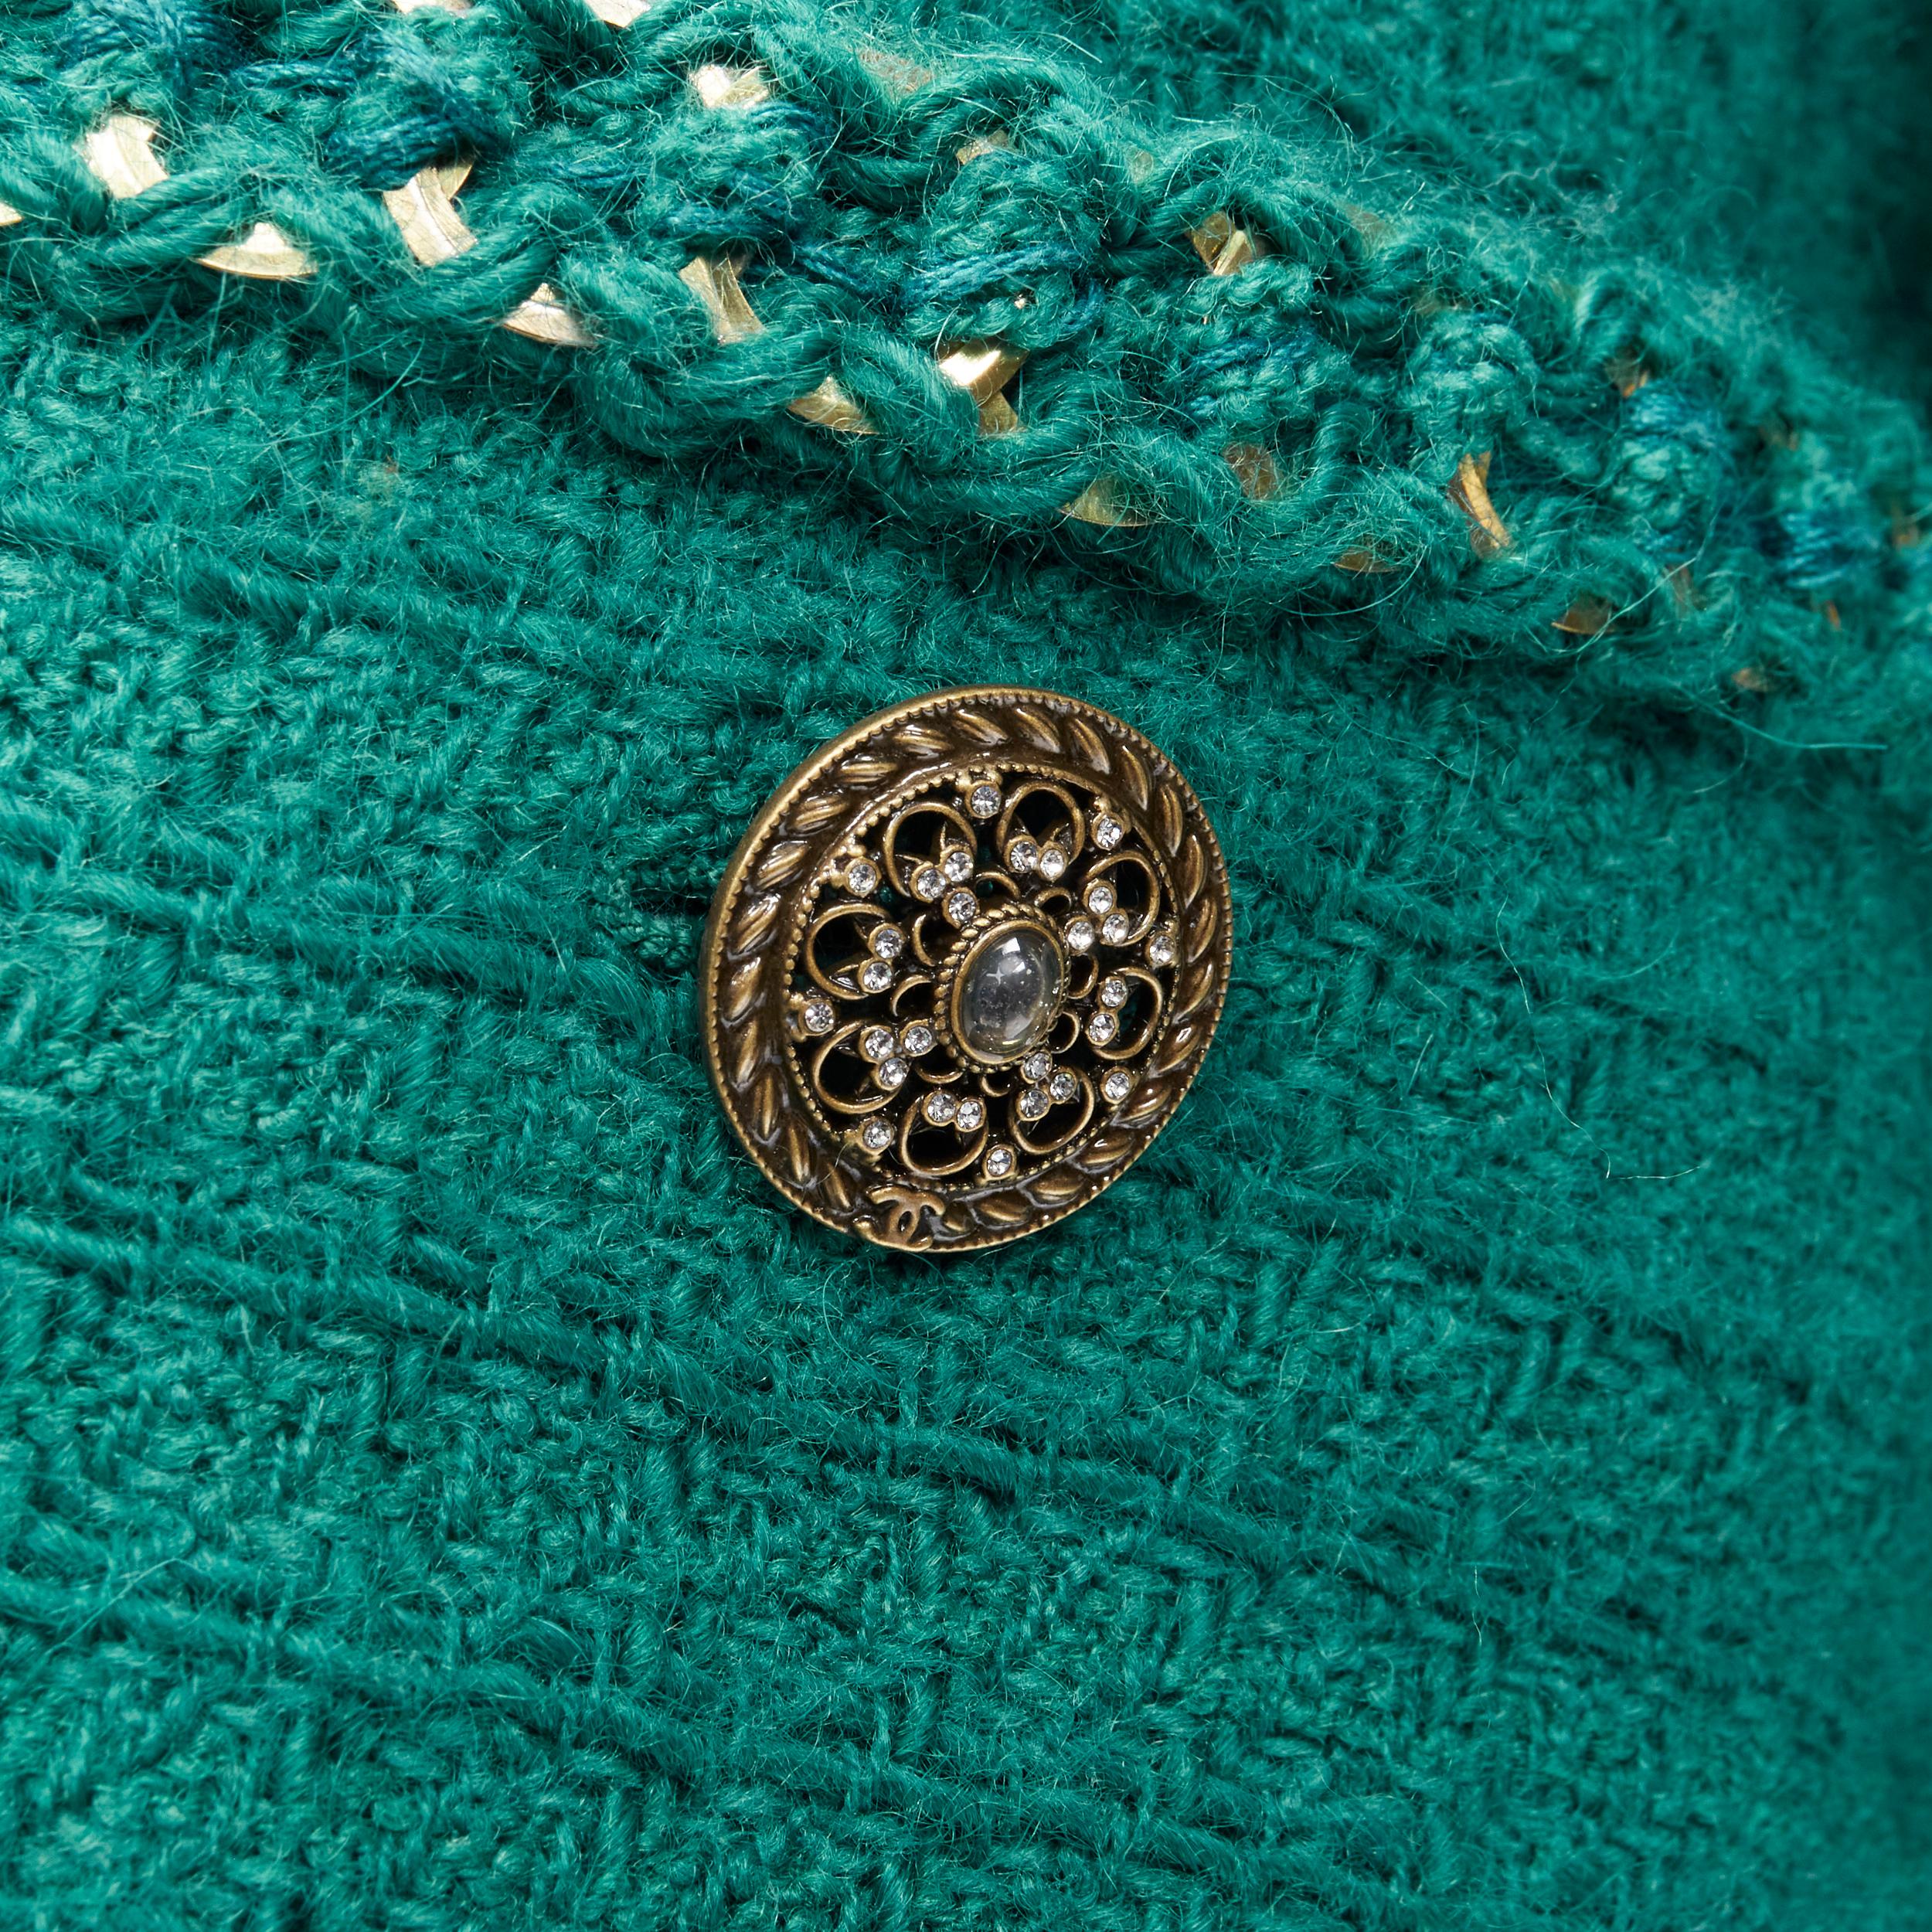 CHANEL 15K Paris Salzburg turquoise tweed gold chain trapeze flared jacket FR42
Brand: Chanel
Designer: Karl Lagerfeld
Collection: 15K Paris Salzburg 
Material: Wool
Color: Turquoise
Pattern: Solid
Extra Detail: Turquoise teal blue checked tweed.